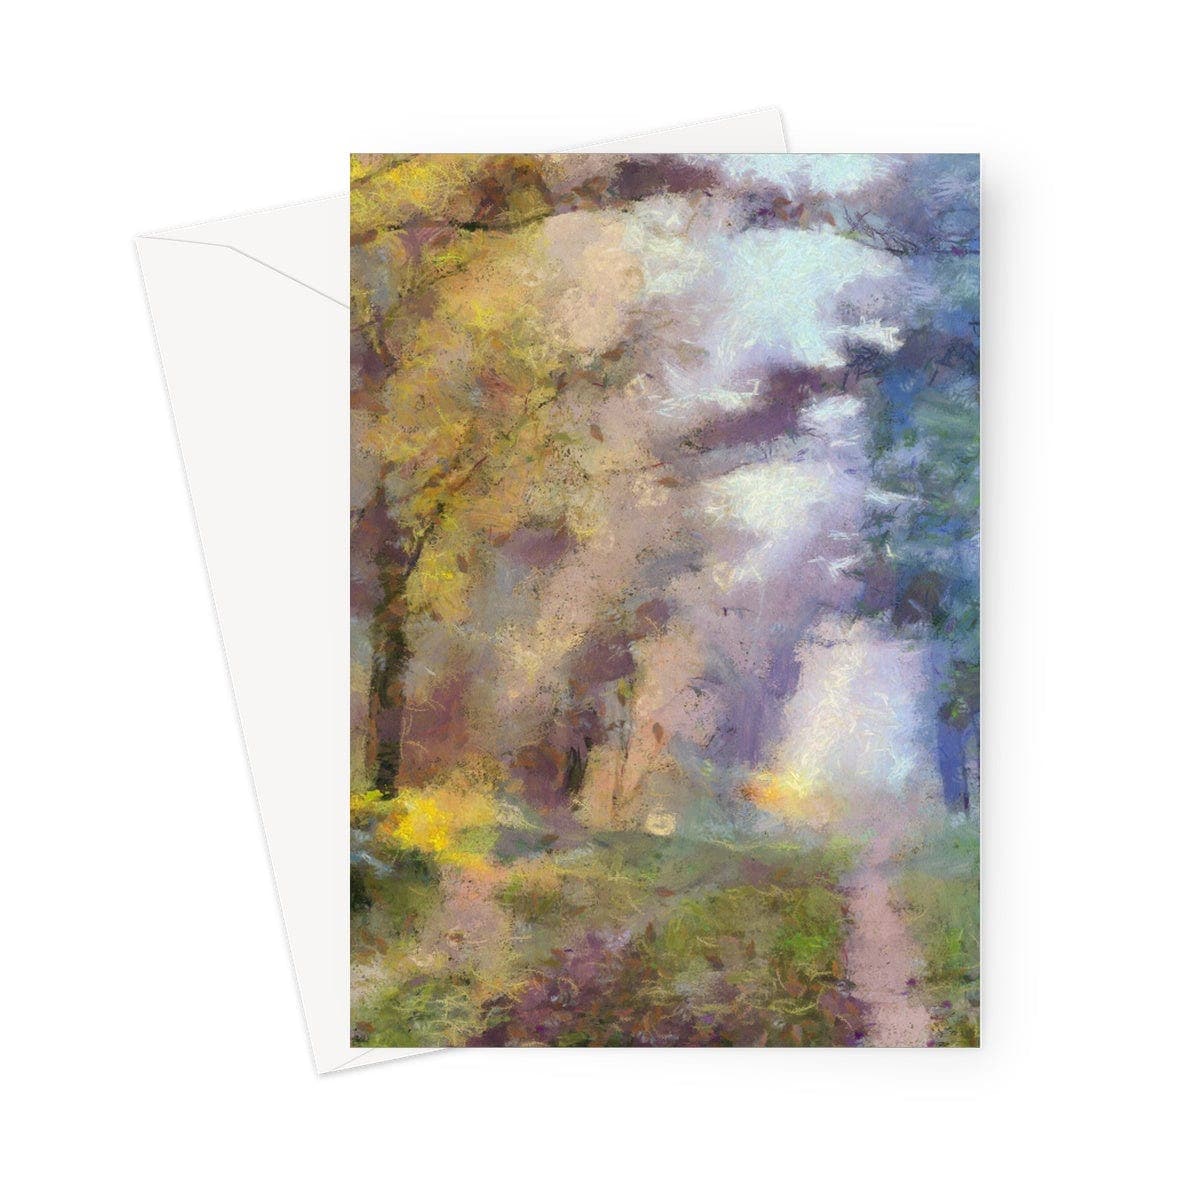 Early Morning Strole in the Woods Greeting Card